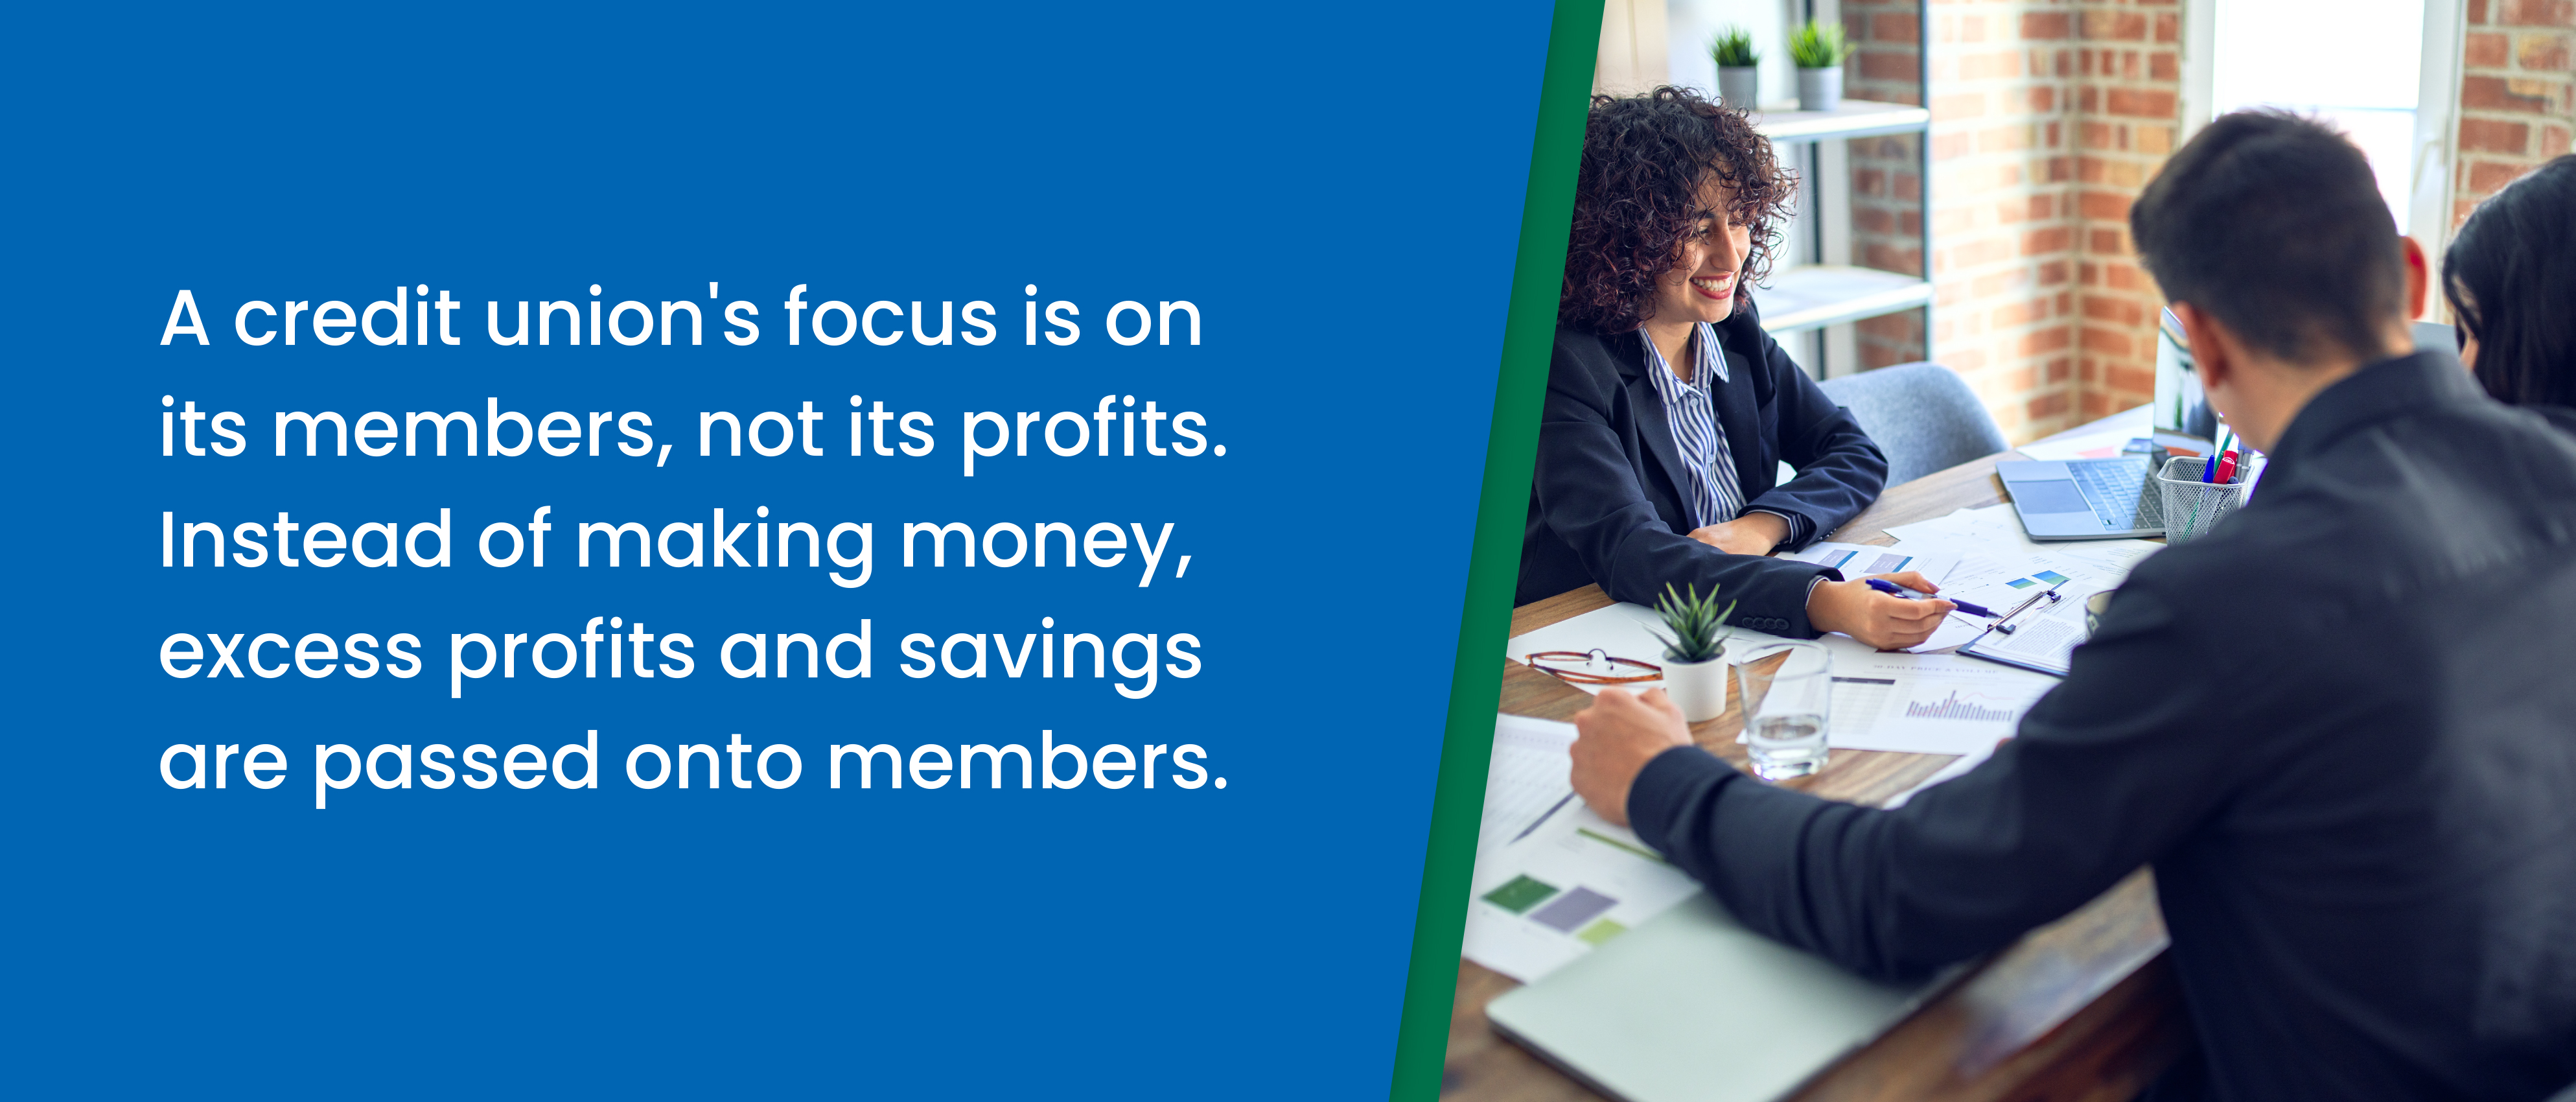 A credit union's focus is its members, not its profits. Instead of making money, excess profits and savings are passed to its members - credit union representative looking at paperwork with a member